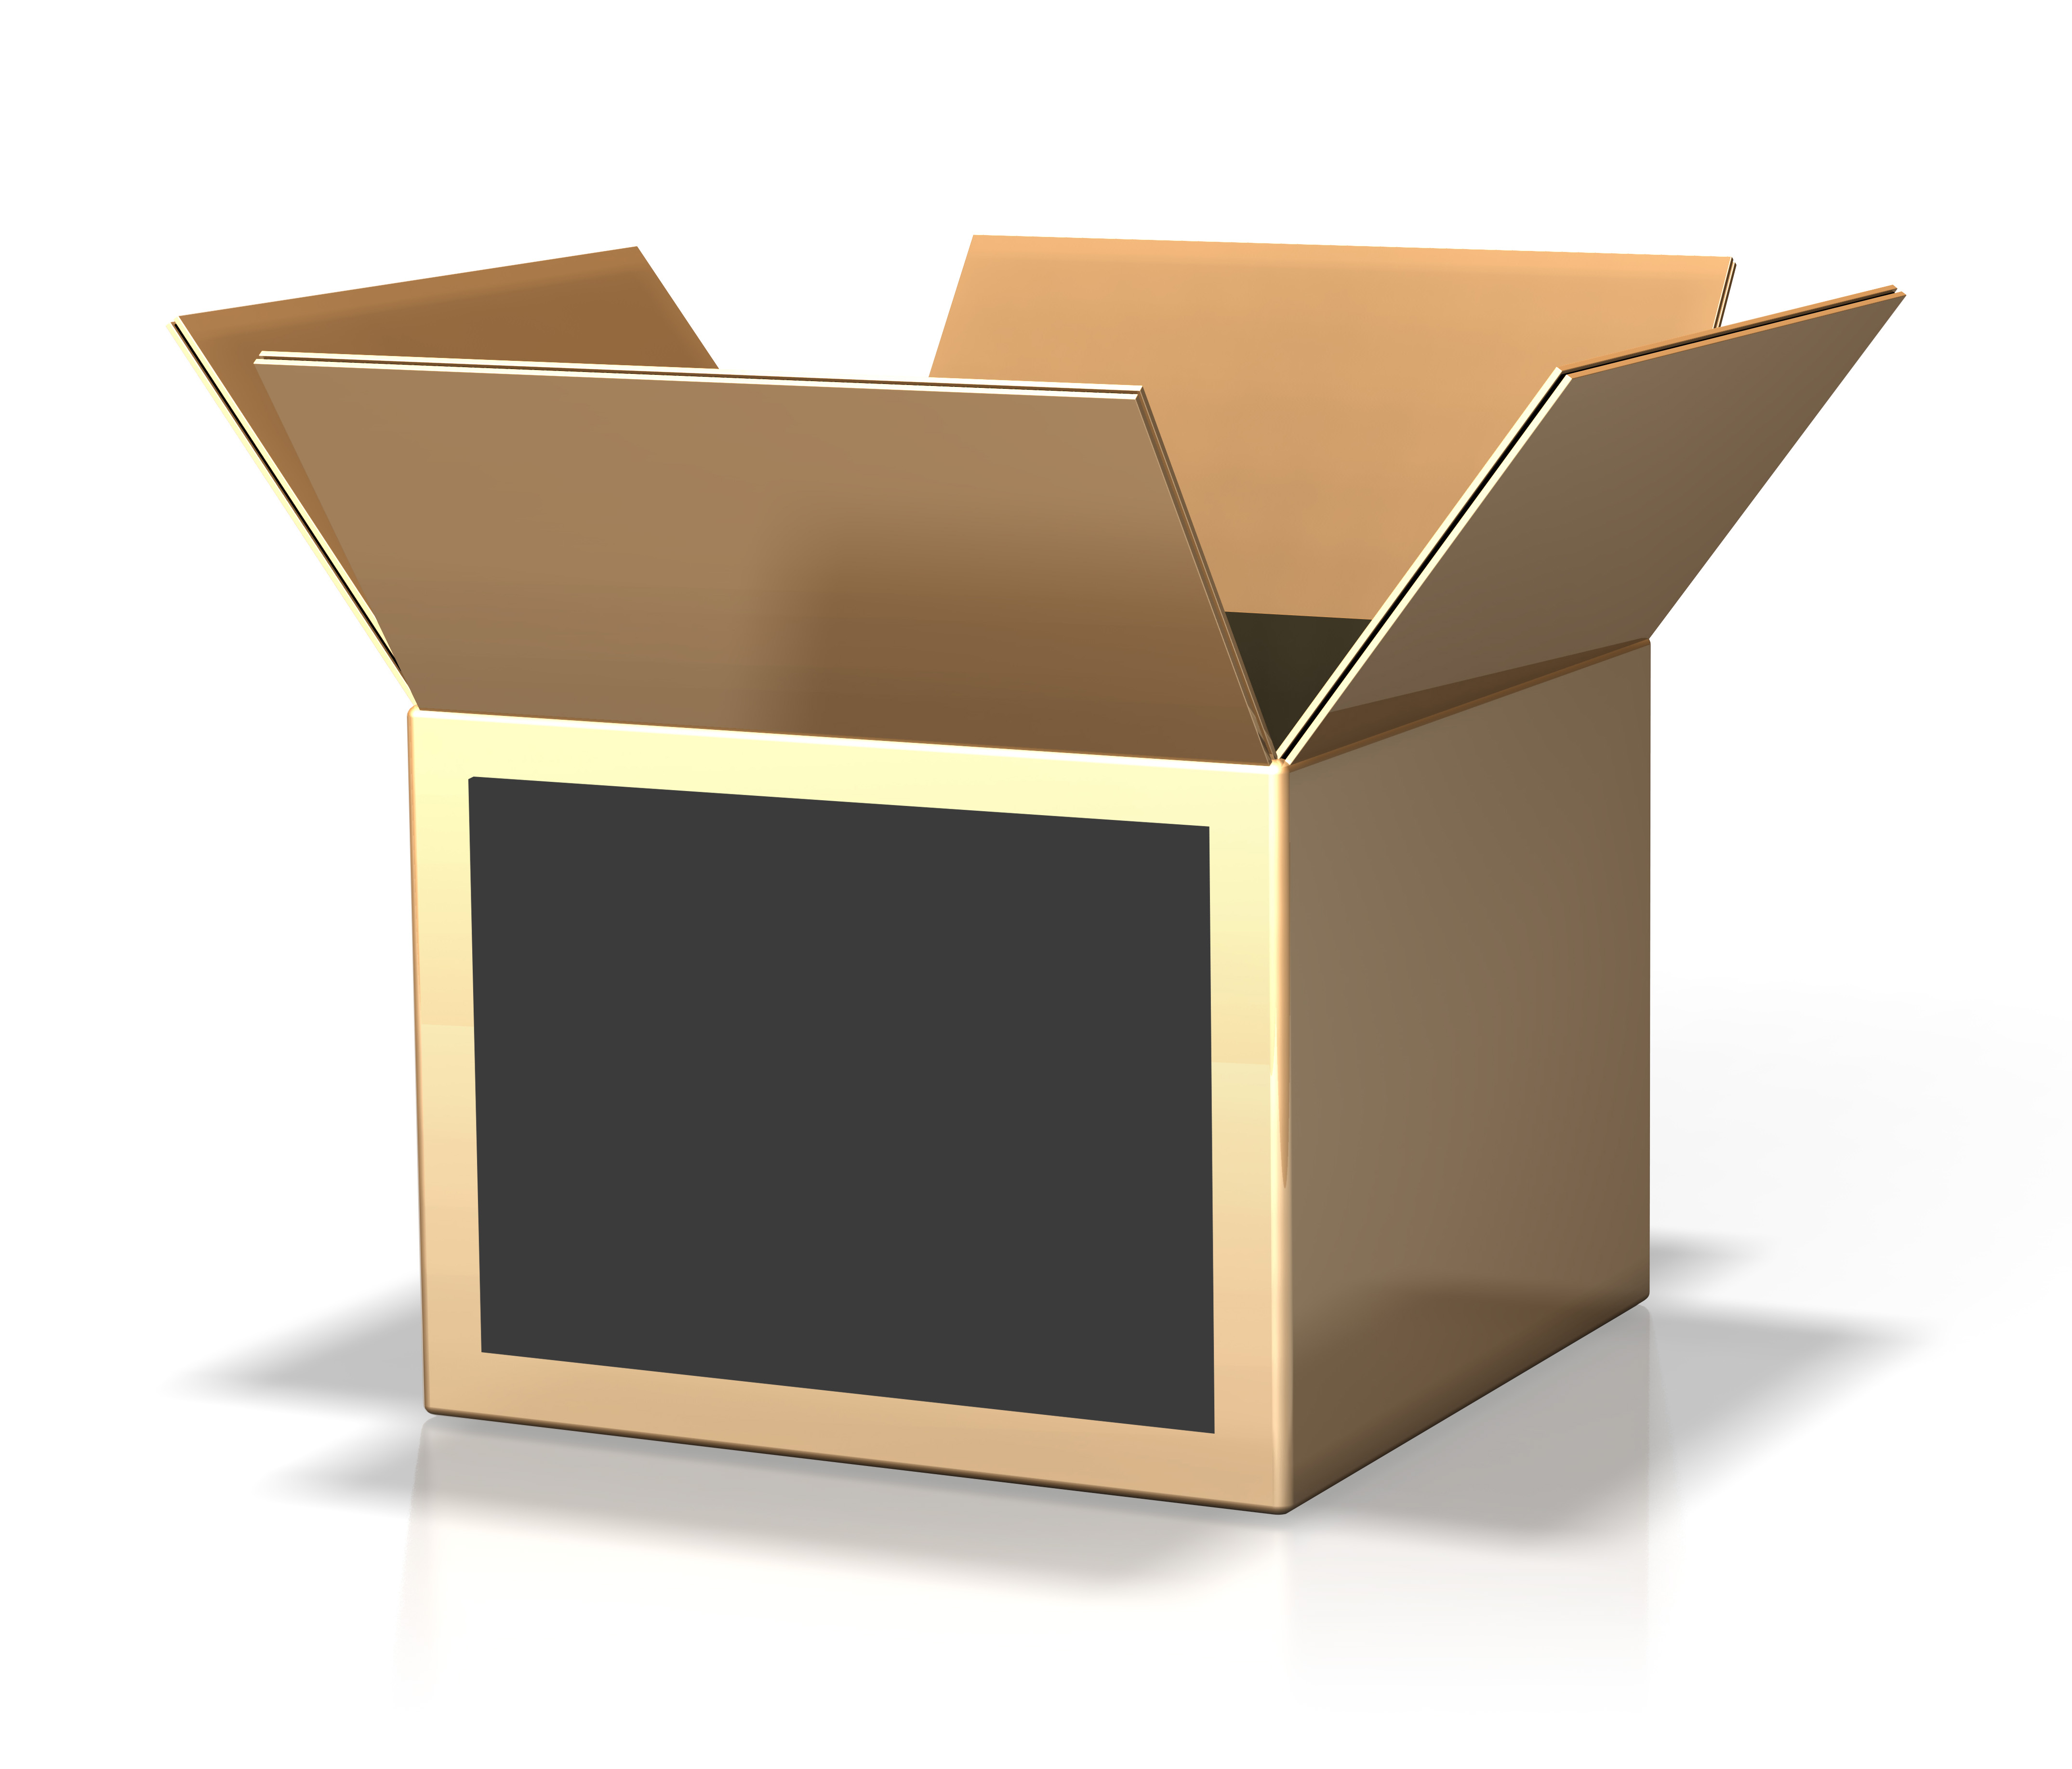 3d rendering of an open cardboard box over a white ...
 Open Box